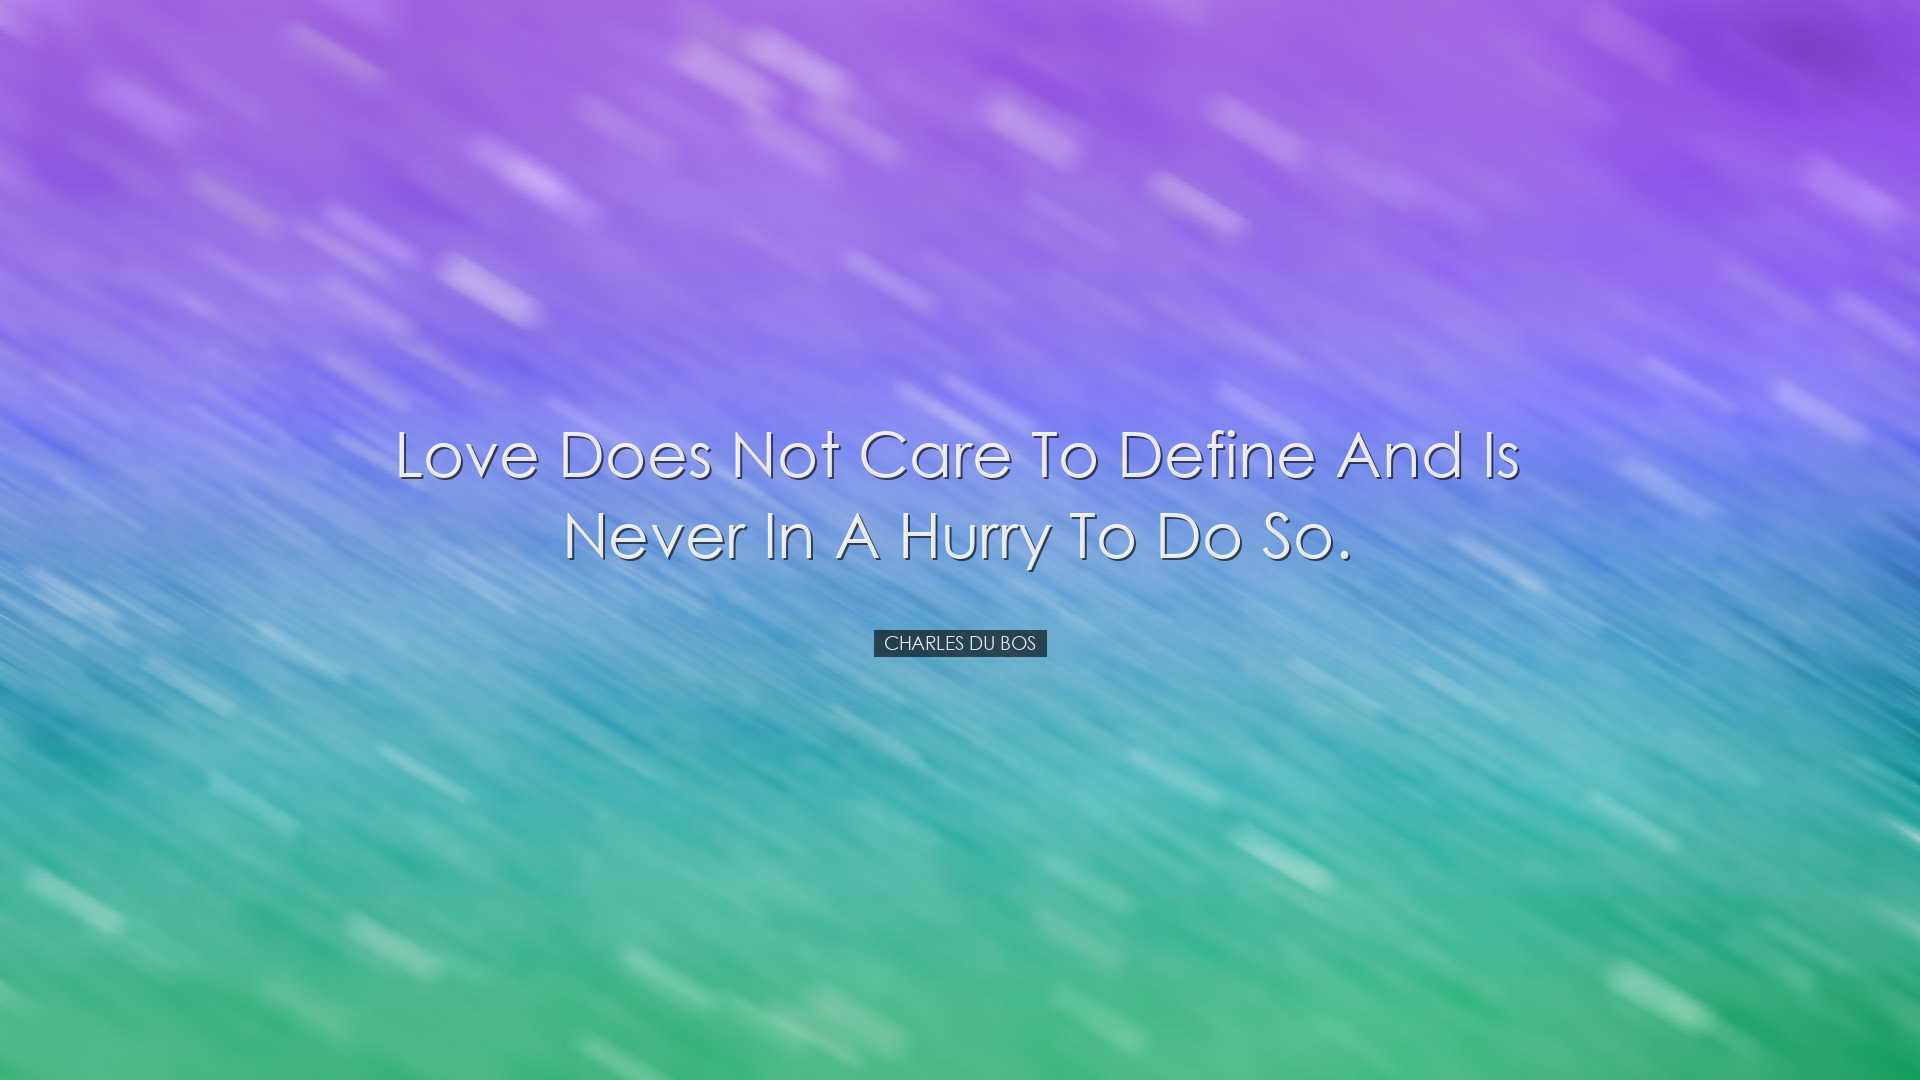 Love does not care to define and is never in a hurry to do so. - C